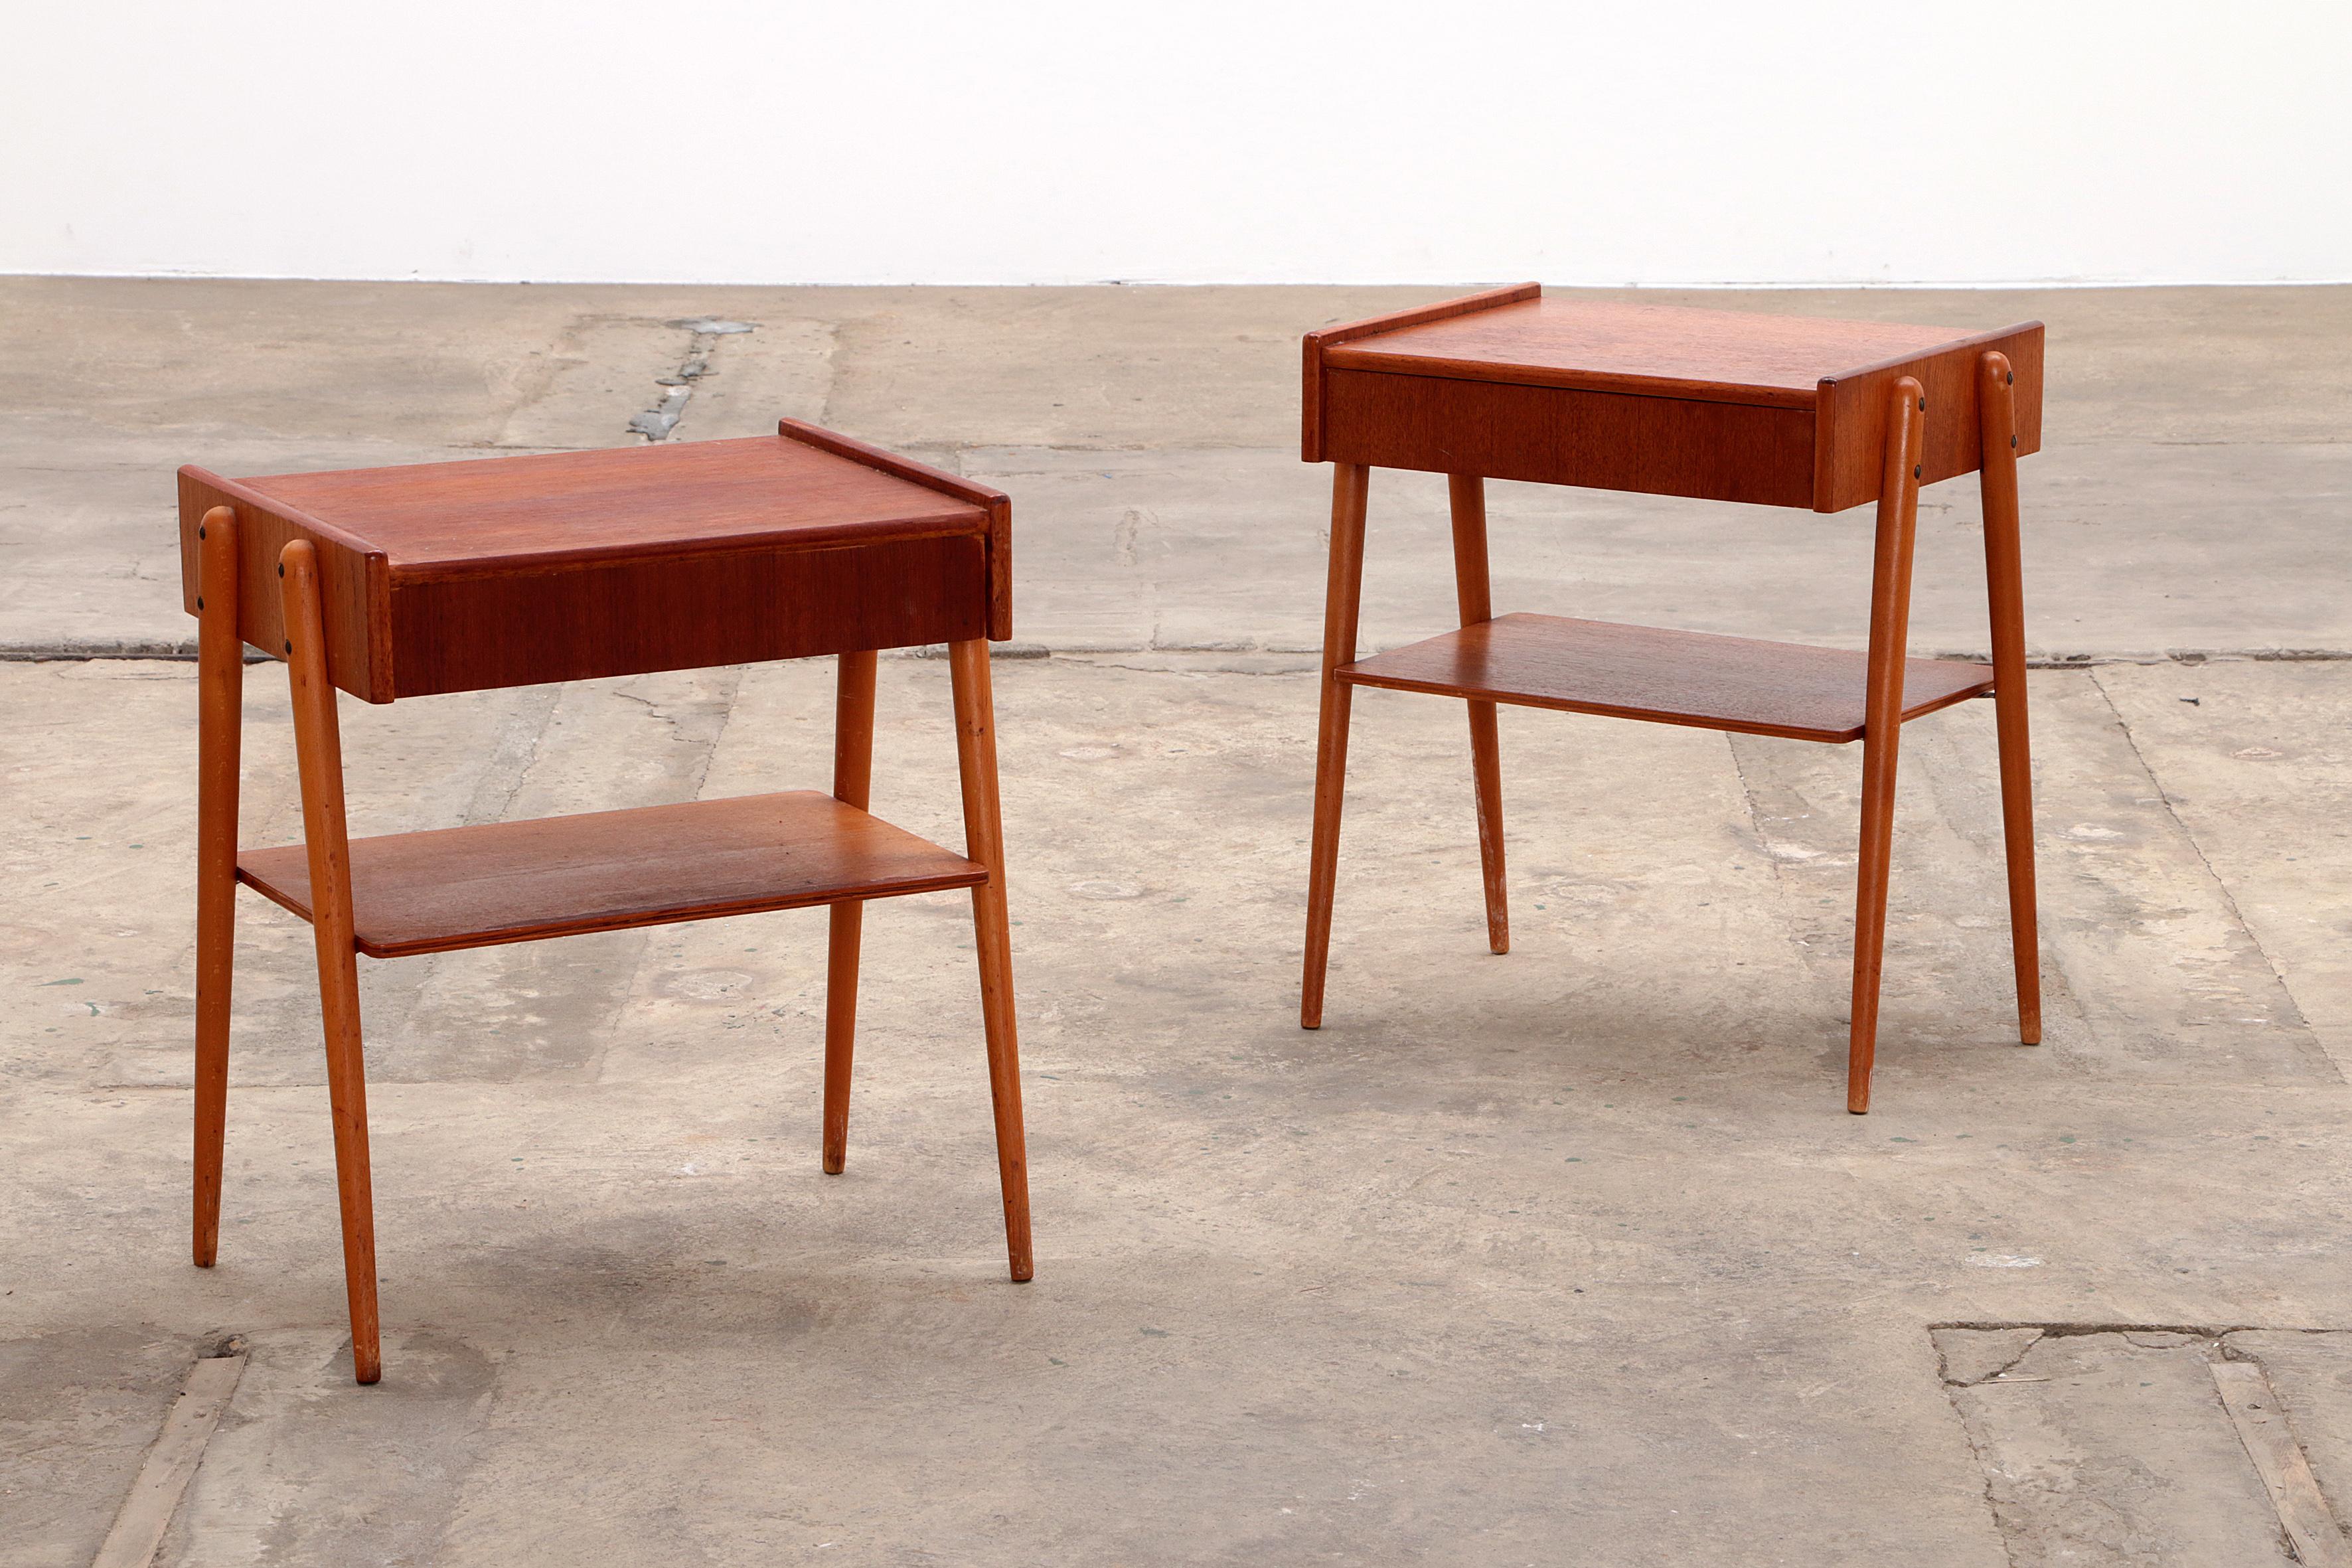 20th Century Pair of Teak Bedside Tables AB Carlstrom, Sweden, 1960s